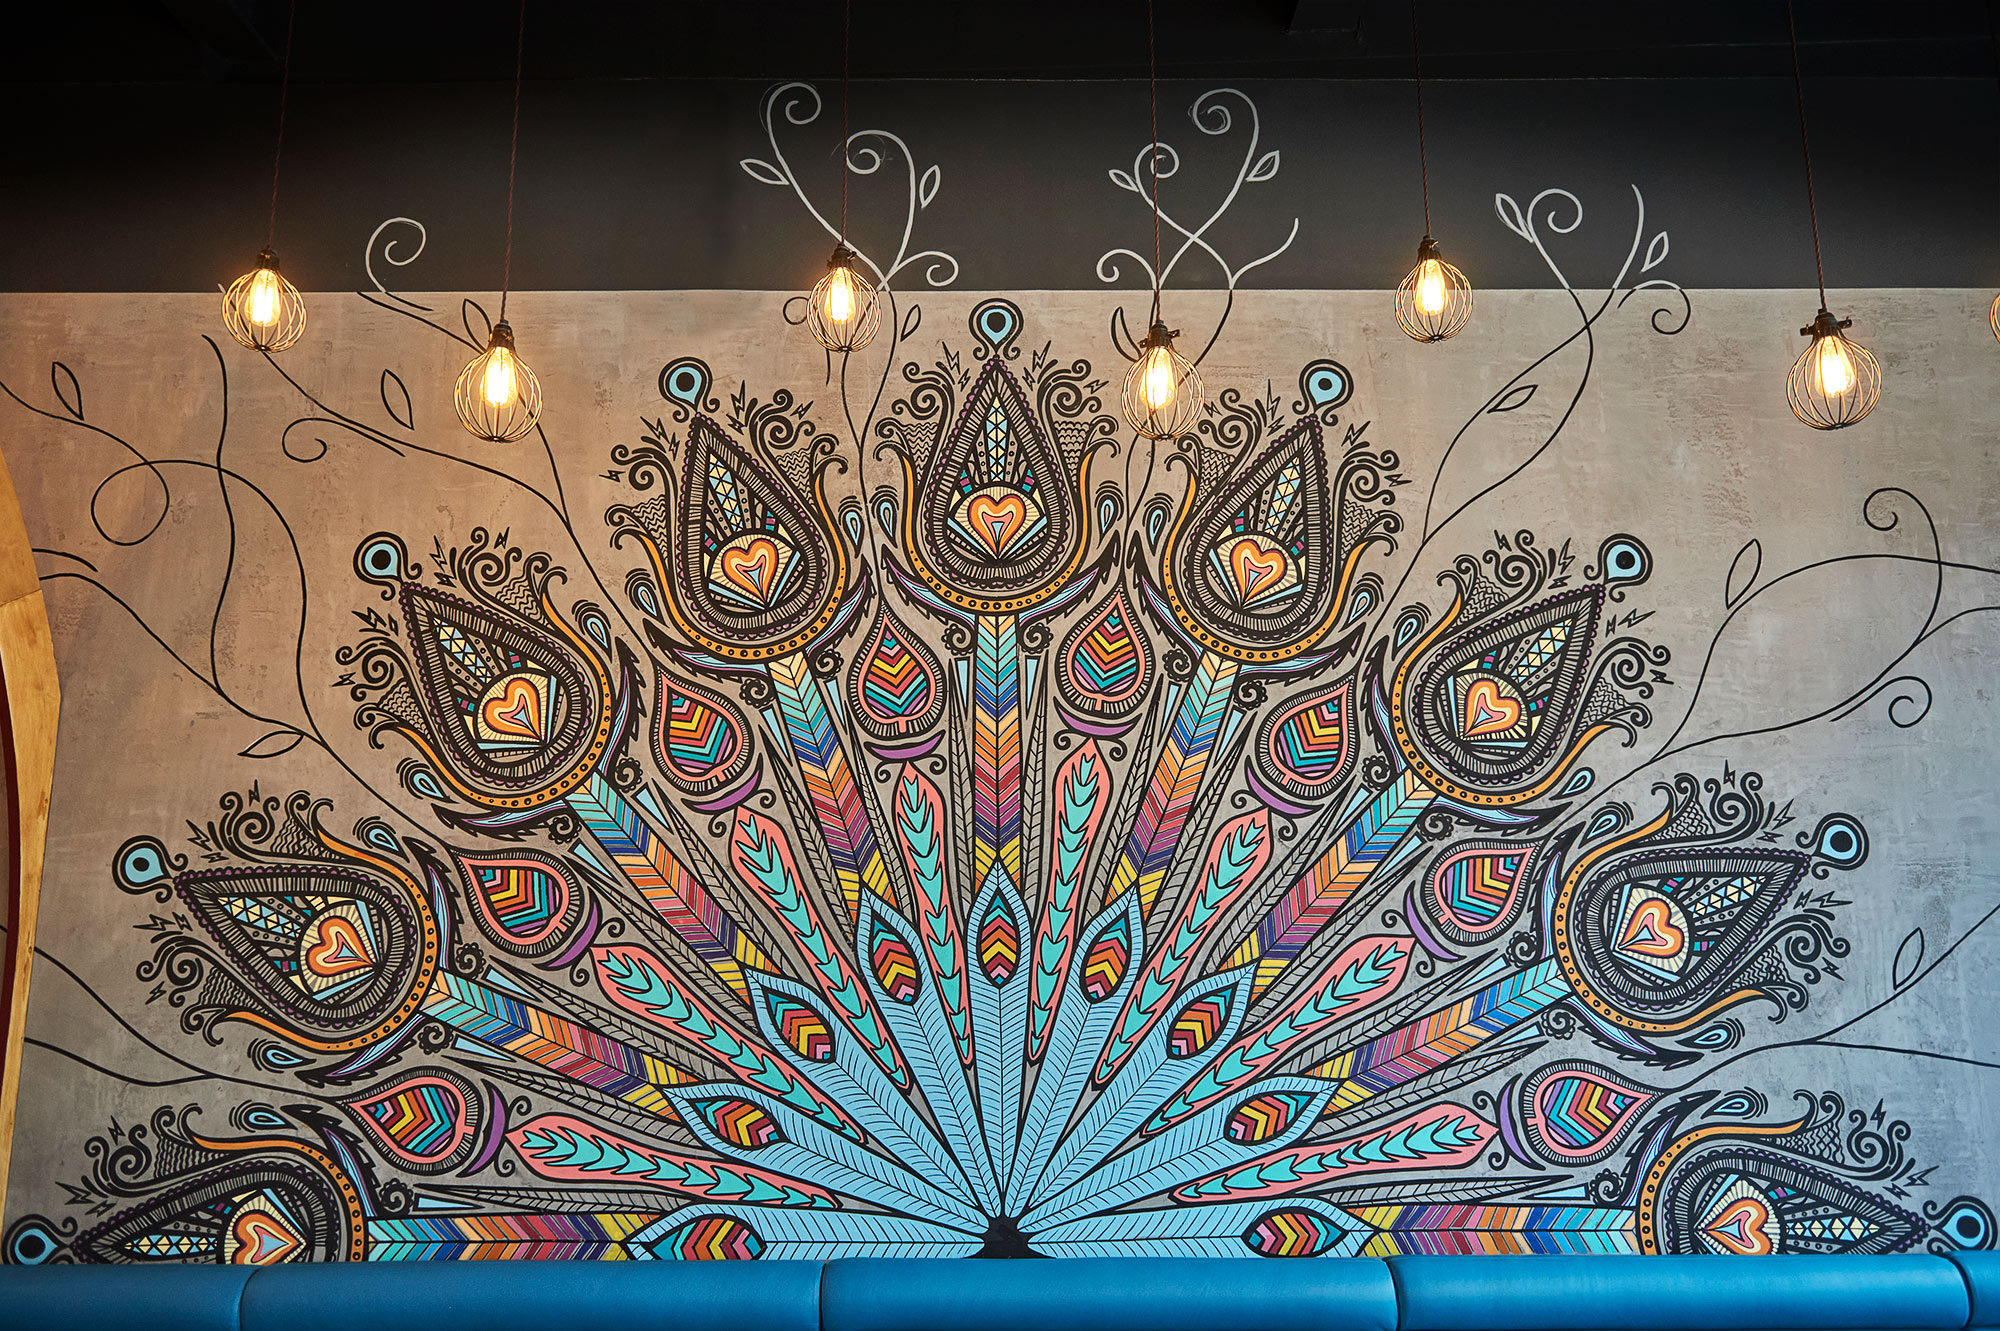 A mural in the style of peacock feathers